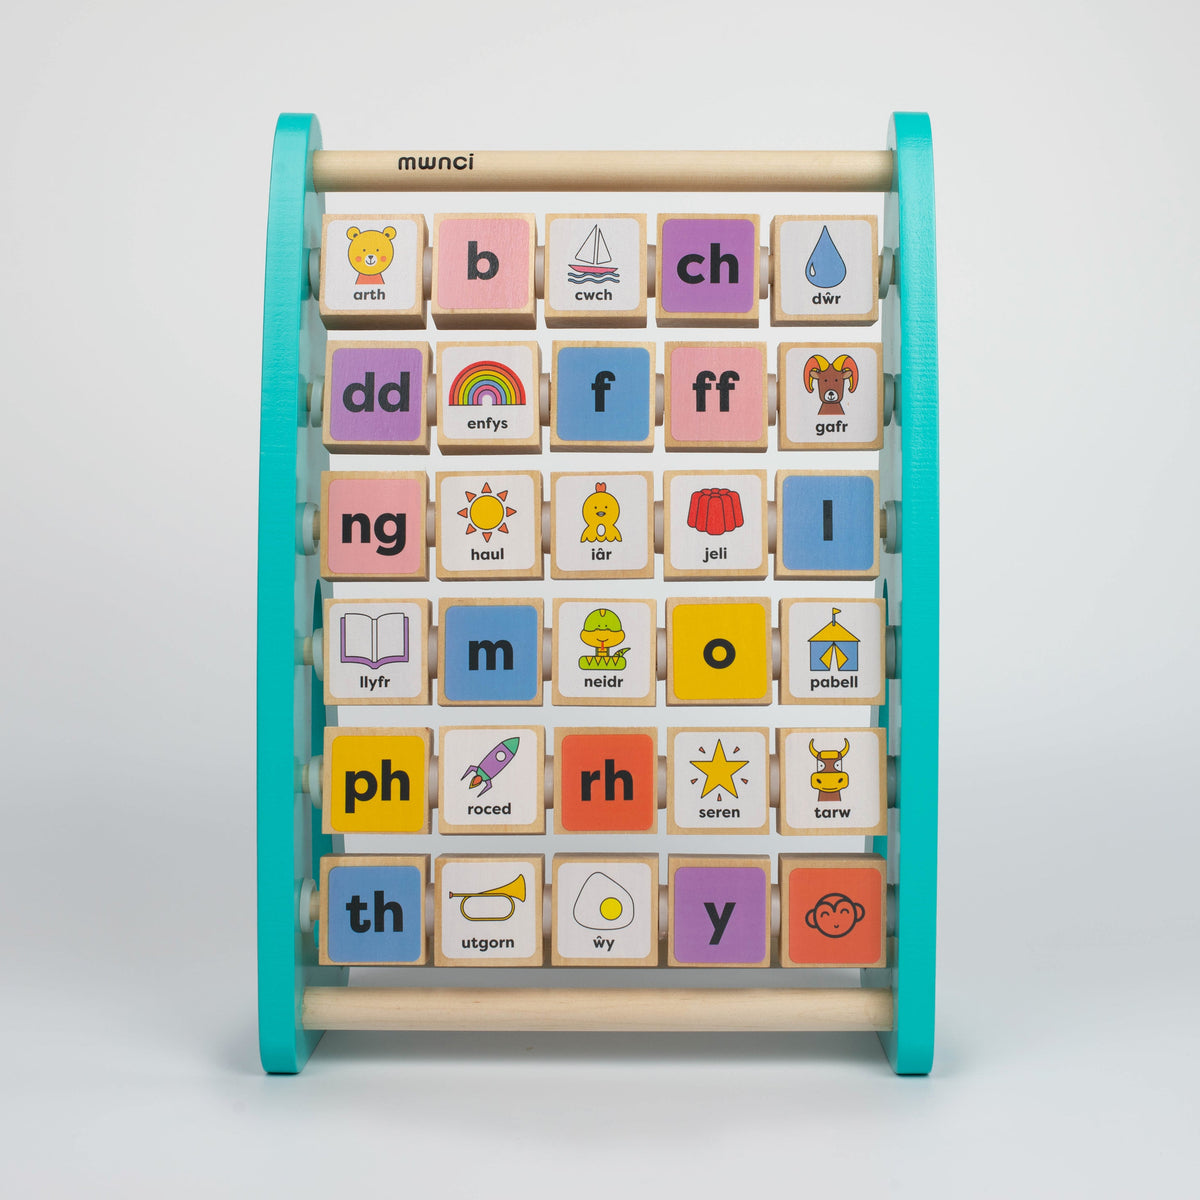 Image shows  Abacus with Welsh alphabet.